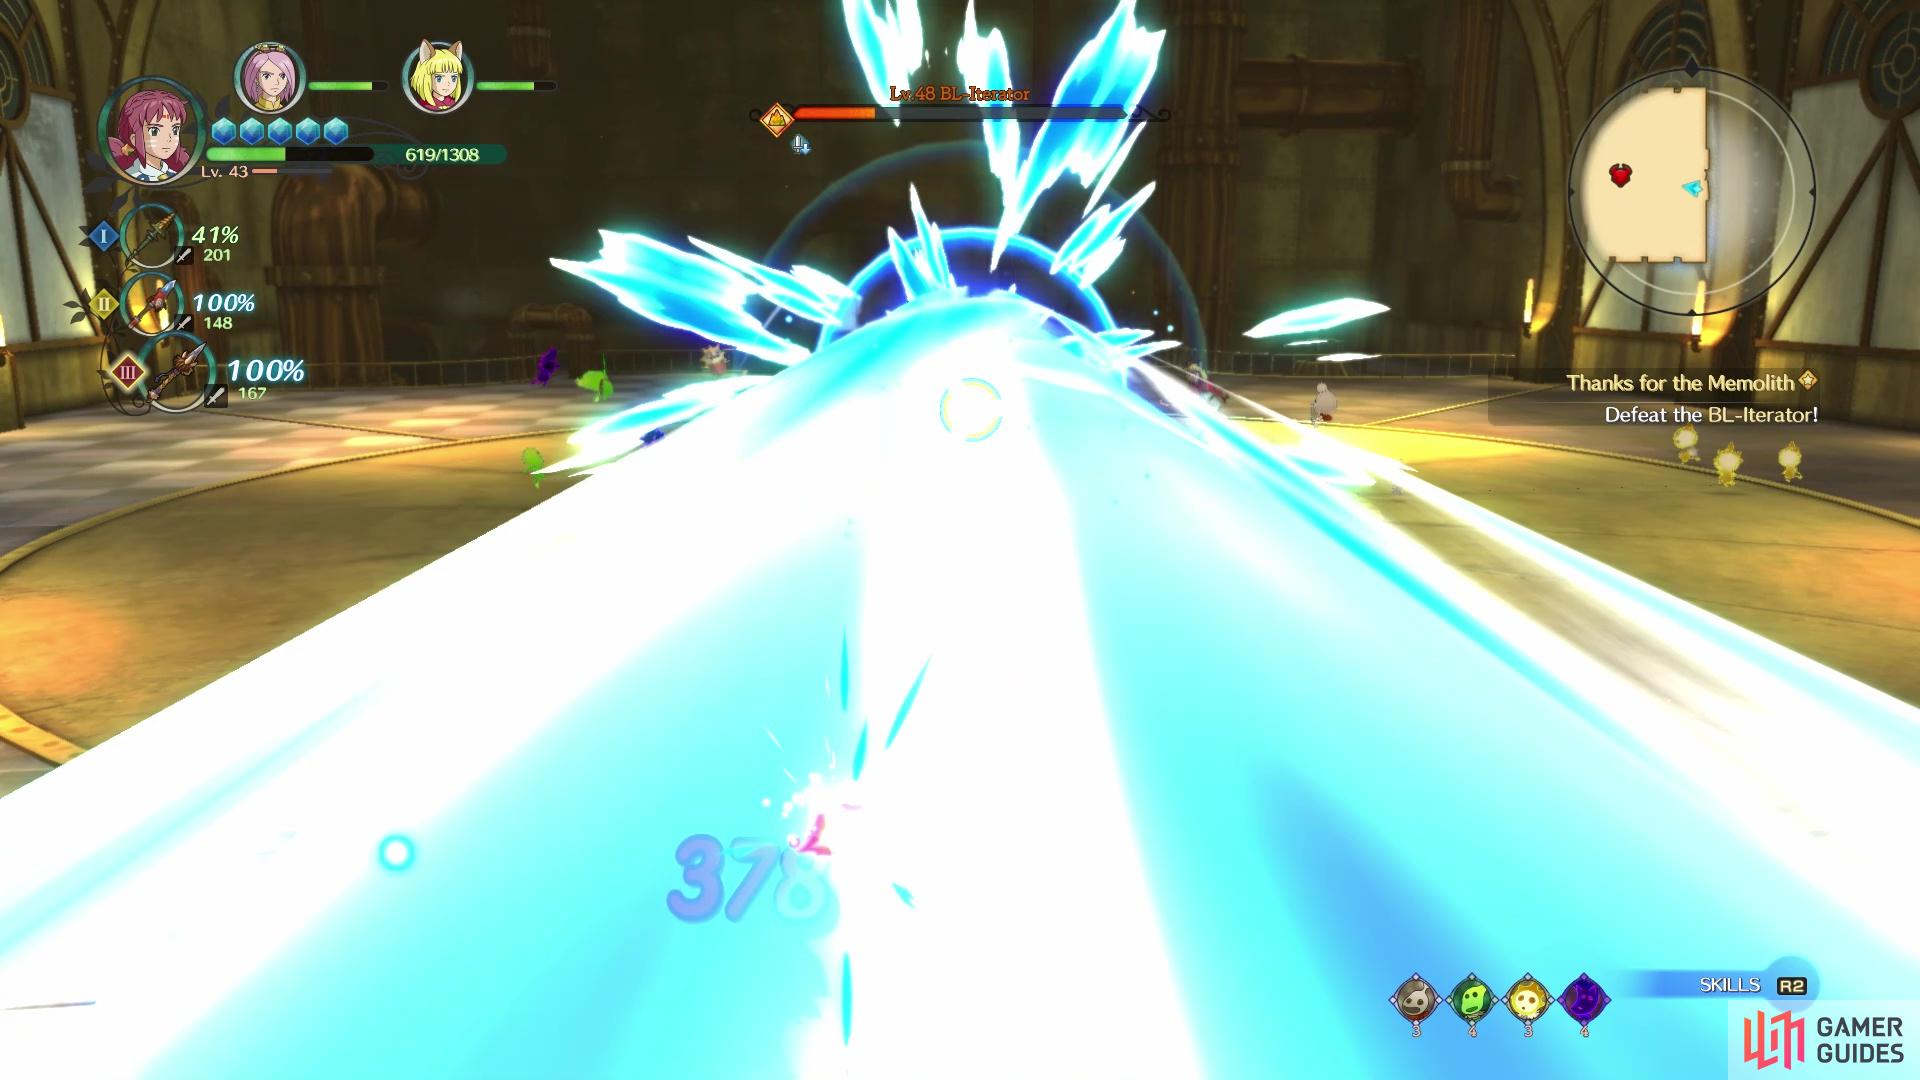 Watch out for the large beam attacks when the boss is charging